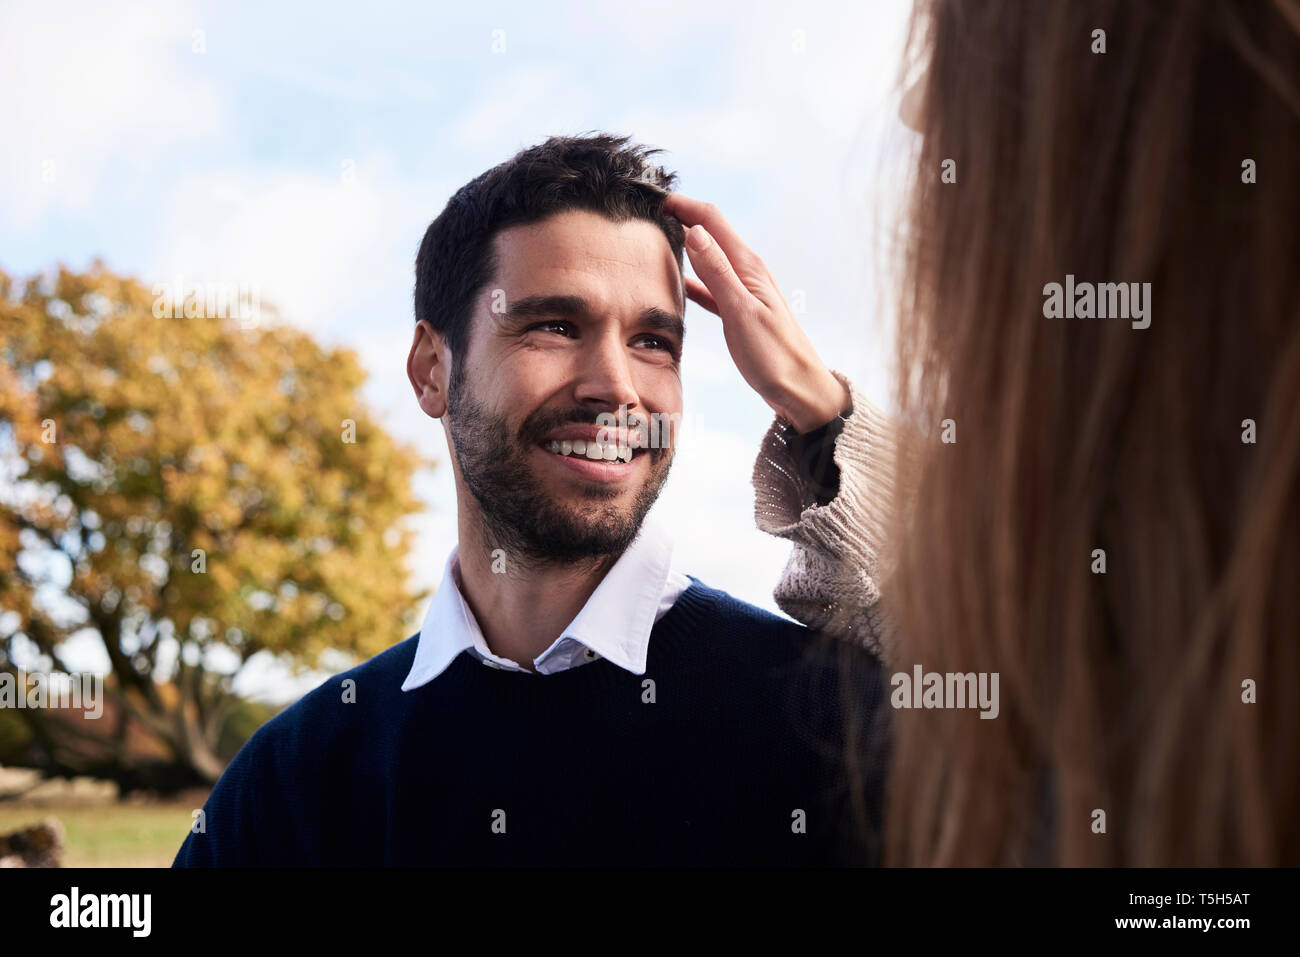 Happy man smiling at girlfriend in a park Stock Photo